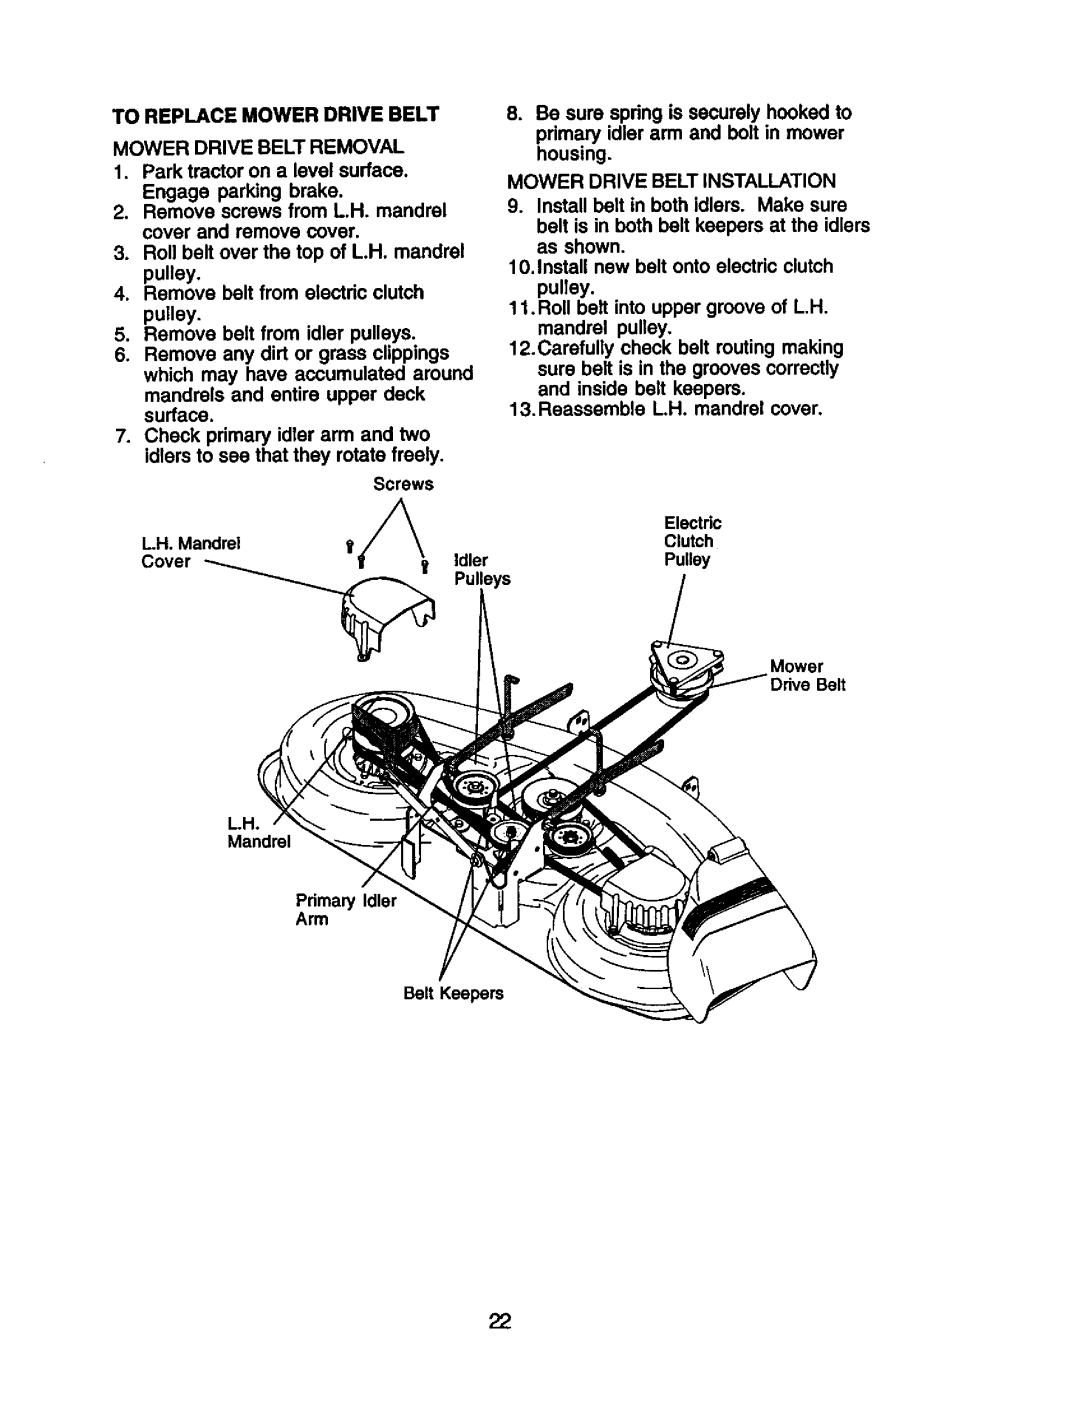 Craftsman 917.274953 manual To Replacemowerdrivebelt Mowerdrivebeltremoval, Rollbelt over thetop of L.H. mandrel pulley 